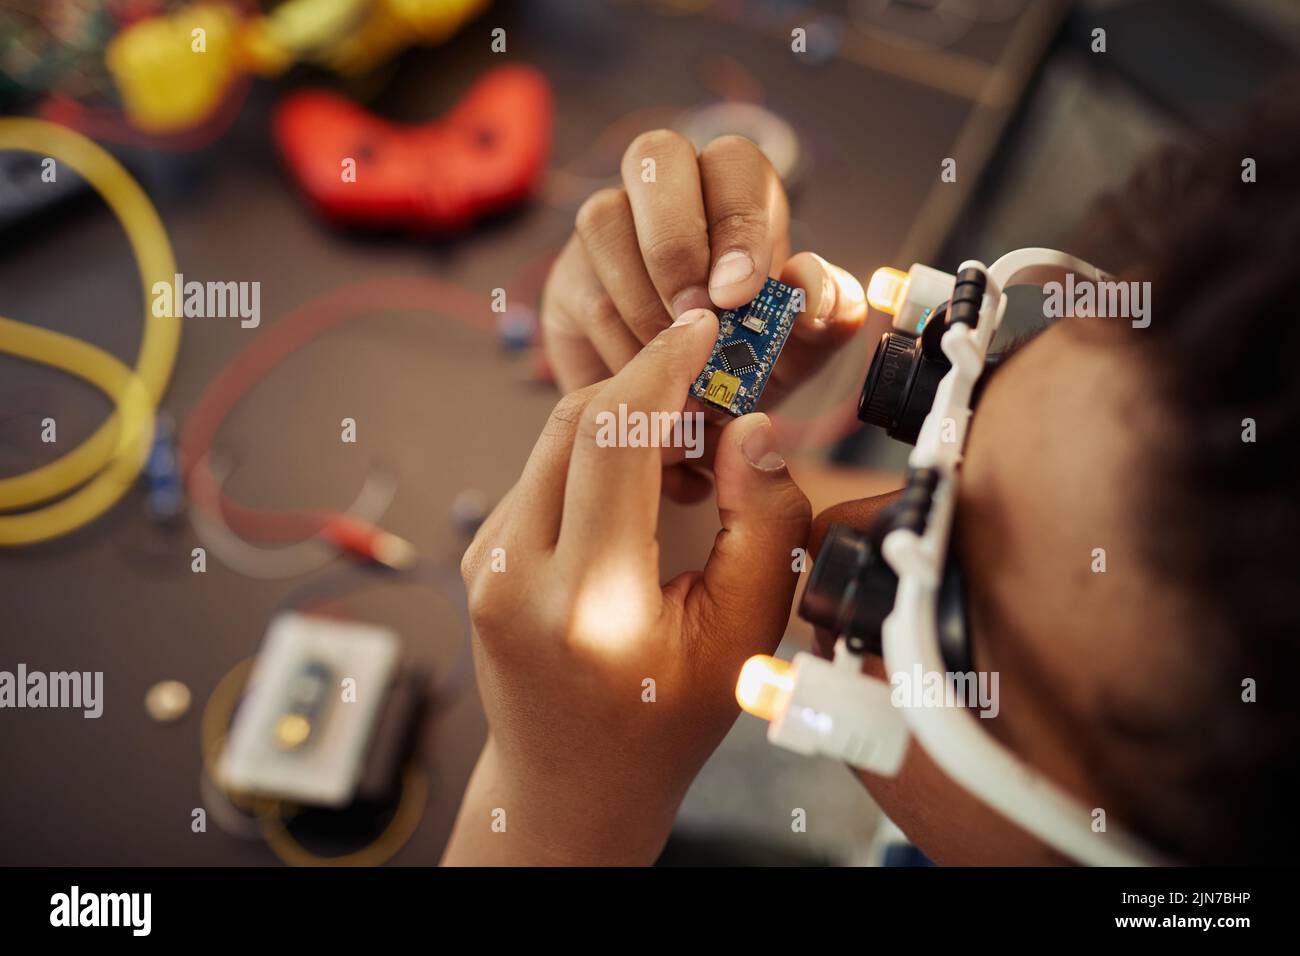 Top view closeup of black boy holding circuit board while building robot, copy space Stock Photo